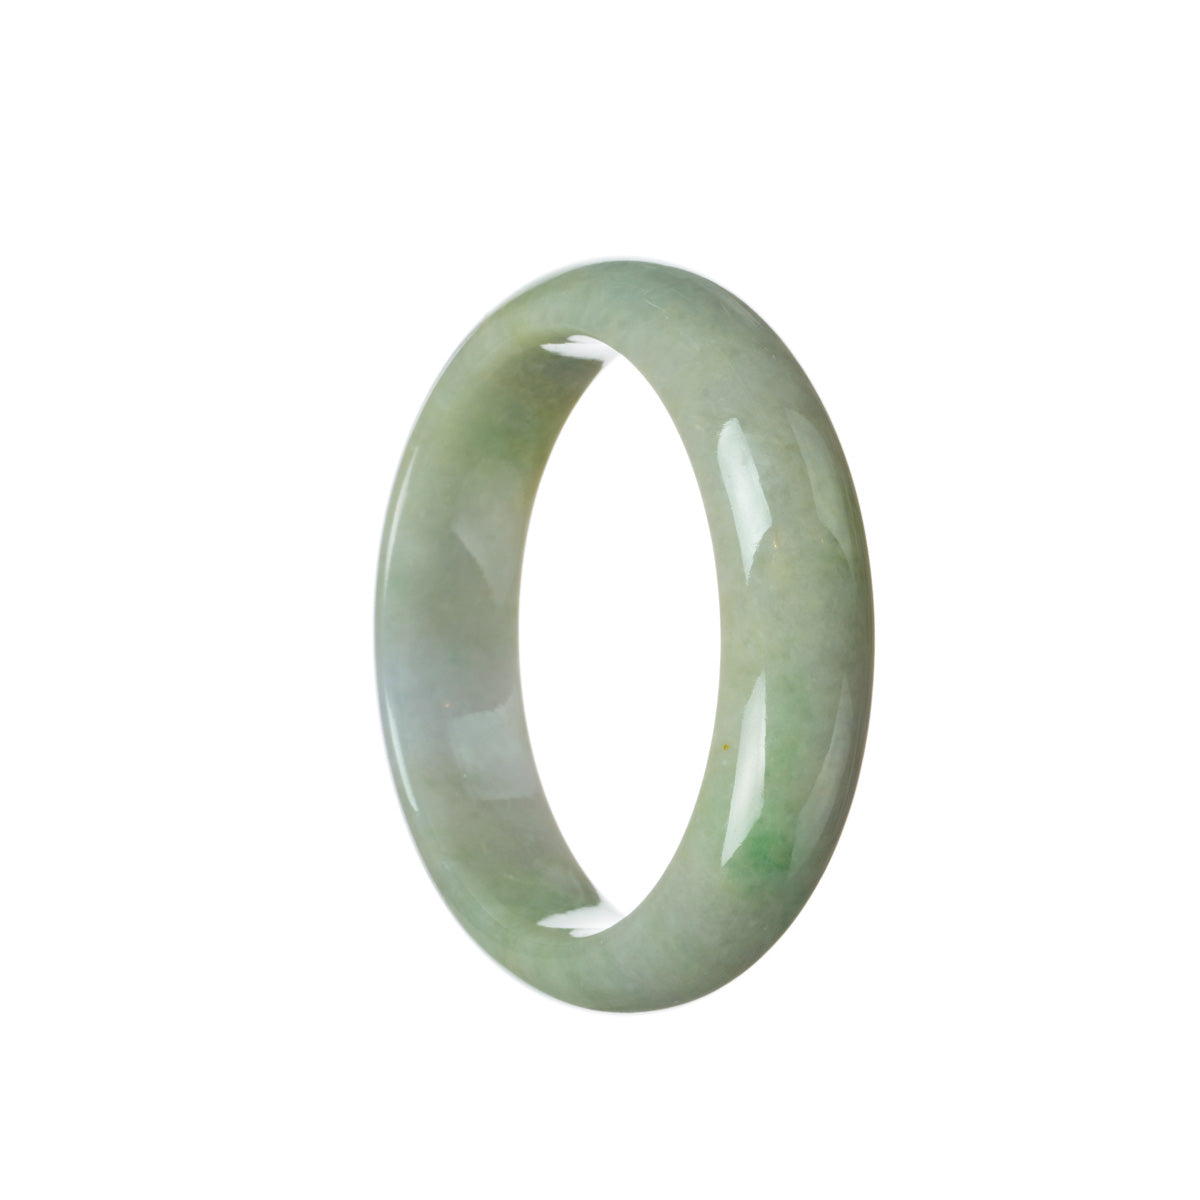 An elegant green and lavender jade bracelet in the shape of a 55mm half moon.